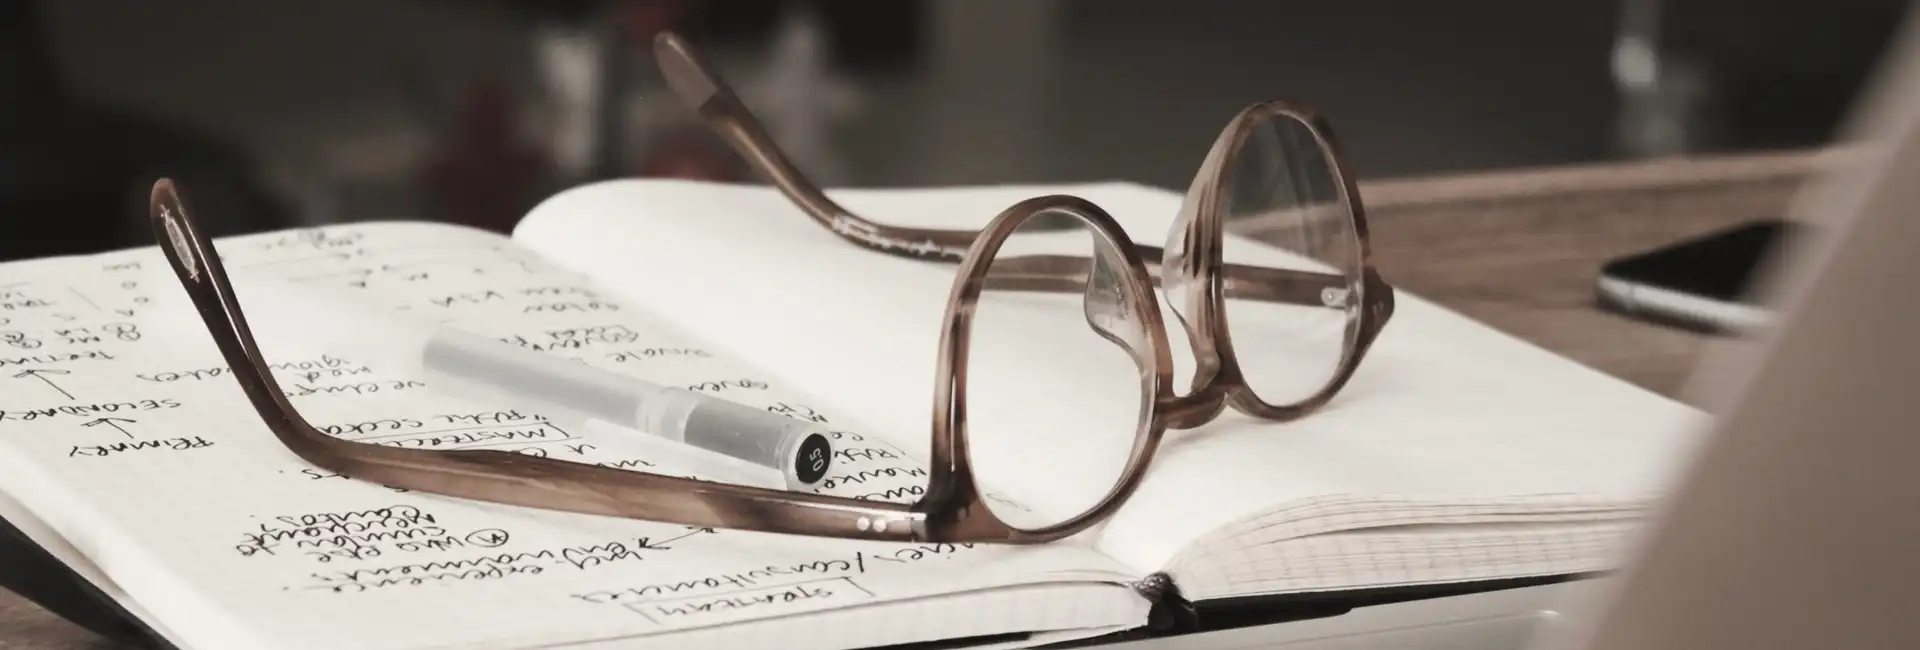 A pair of glasses rests on the open pages of a note book.